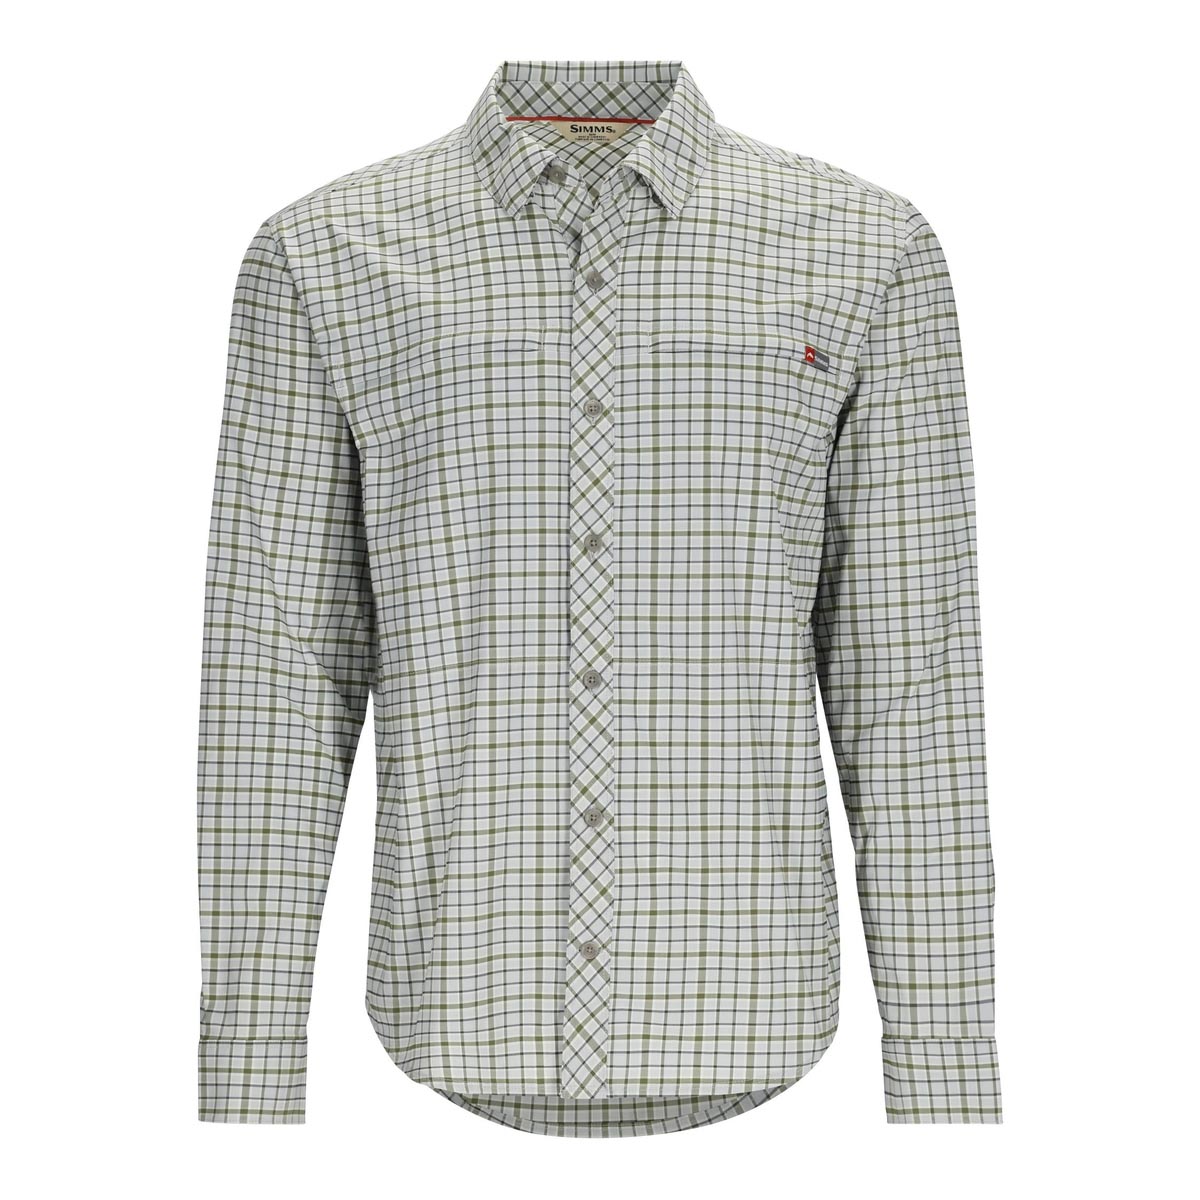 Shop Men's Clothing from Simms